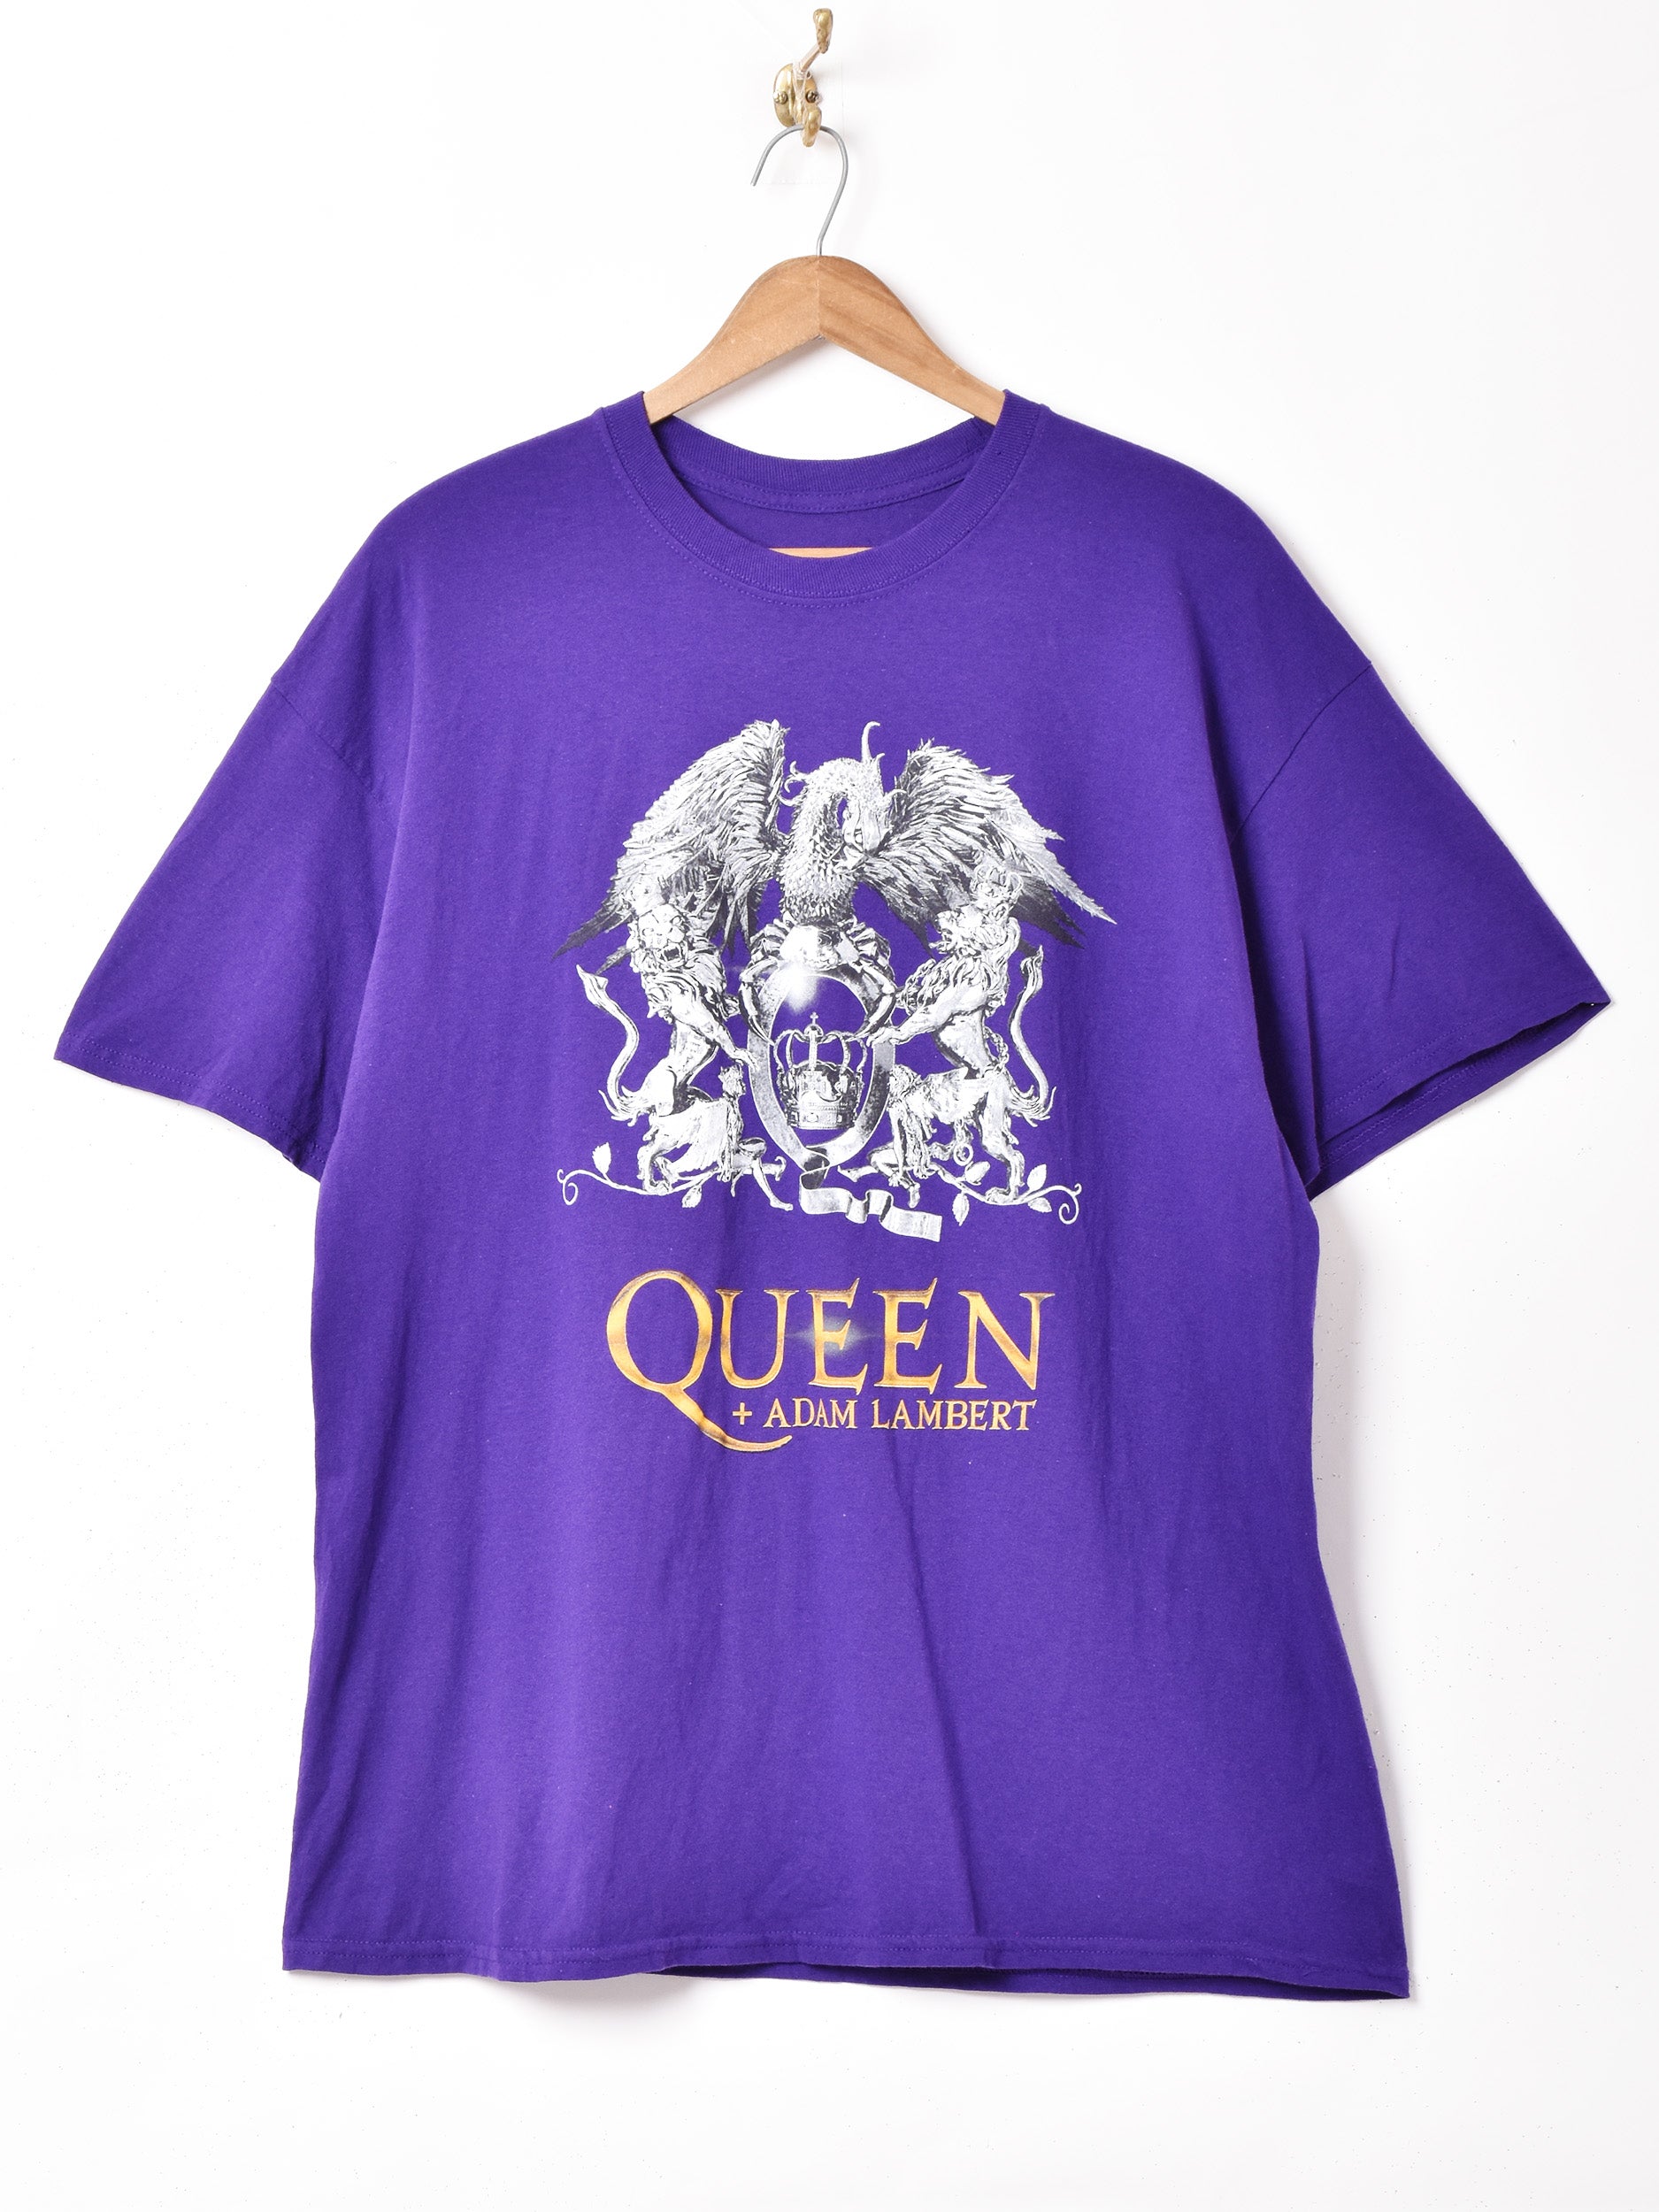 QUEEN ツアーTシャツ – 古着屋Top of the Hillのネット通販サイト